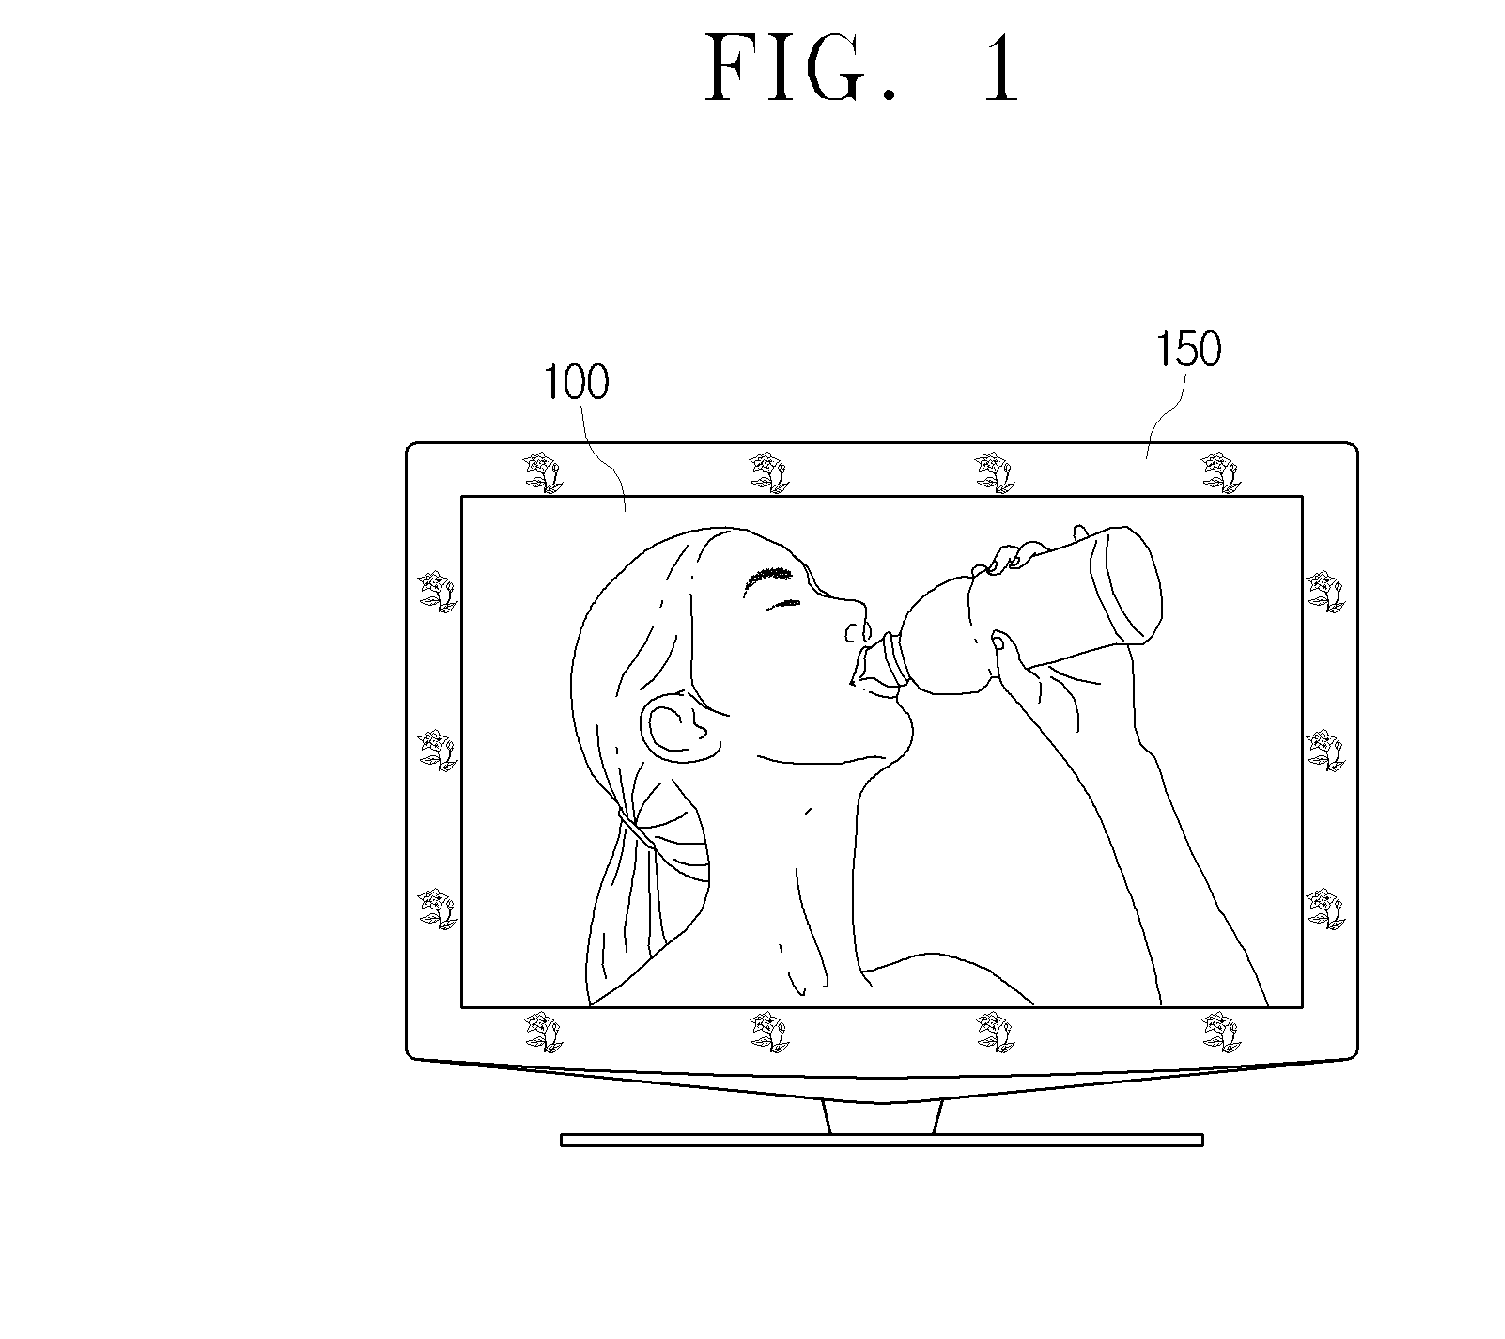 Image display apparatus of which display is disposed on border area and image display method thereof